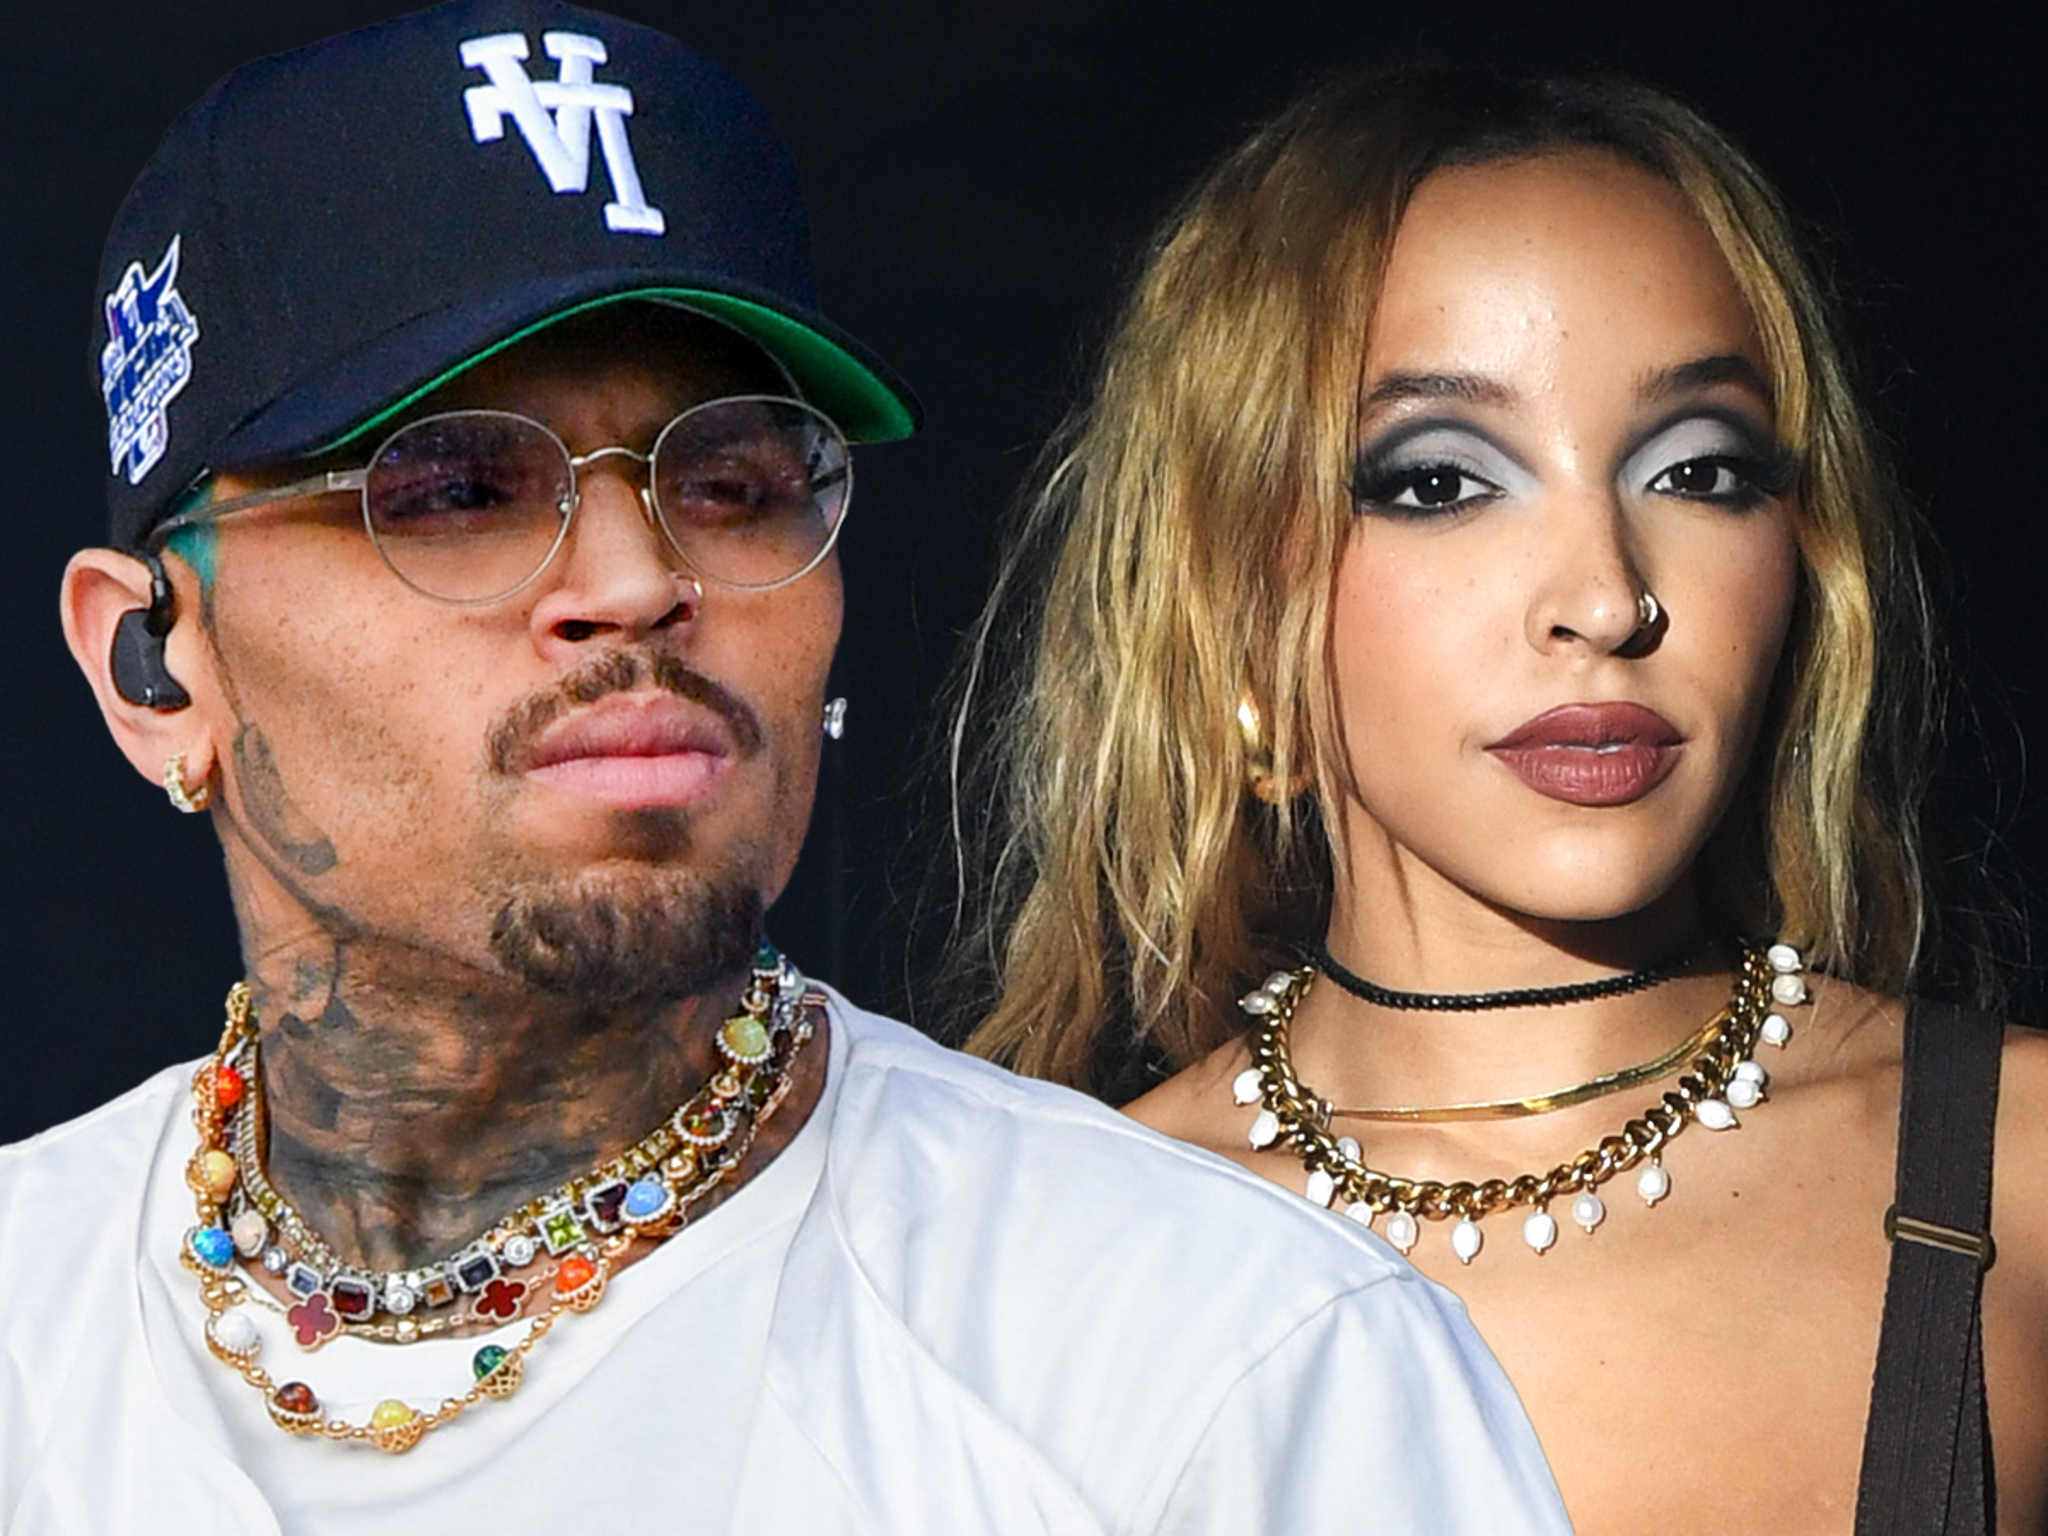 Tinashe Reflects on 'Embarrassing' R. Kelly and Chris Brown Collaborations